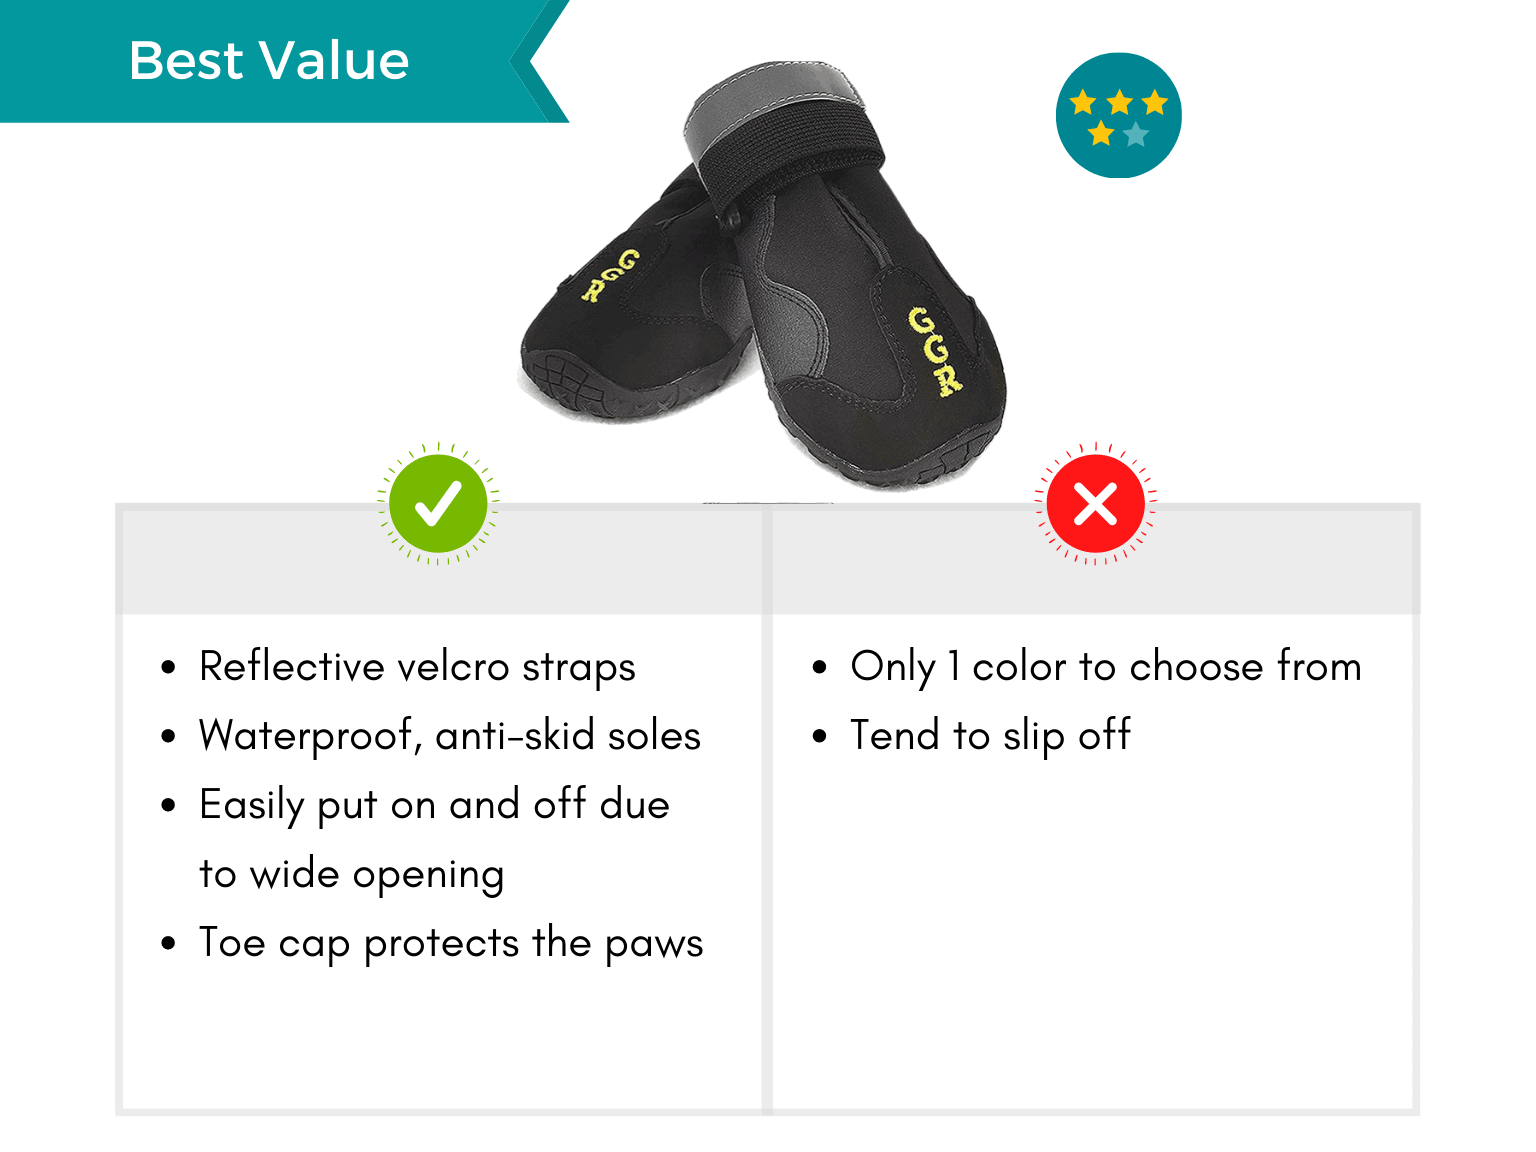 Infographic displaying pros and cons of the best value-for-money waterproof dog boots.